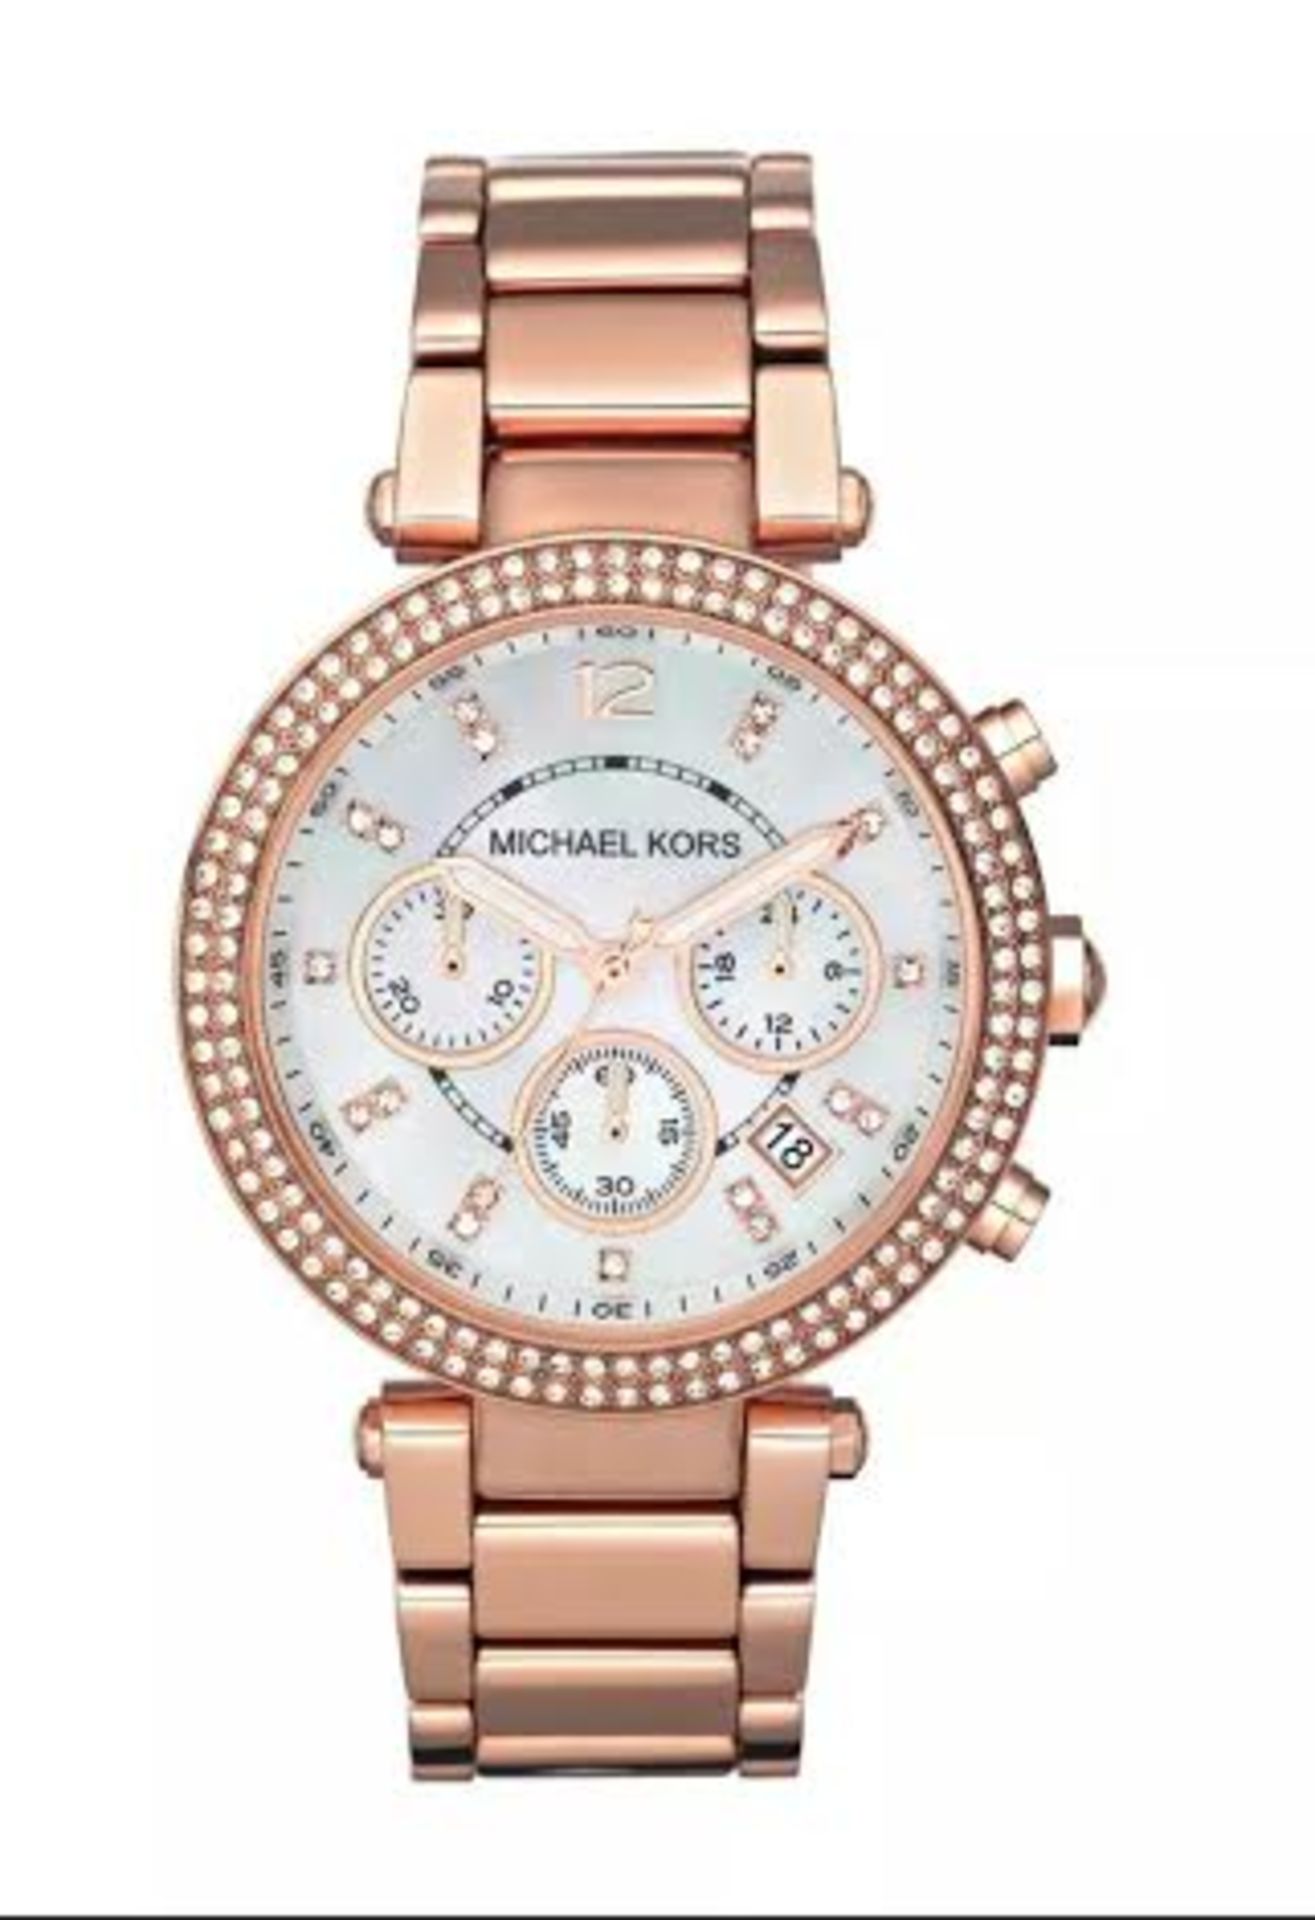 BRAND NEW MICHAEL KORS MK5491, LADIES DESIGNER WATCH, COMPLETE WITH ORIGINAL BOX AND MANUAL - RRP £